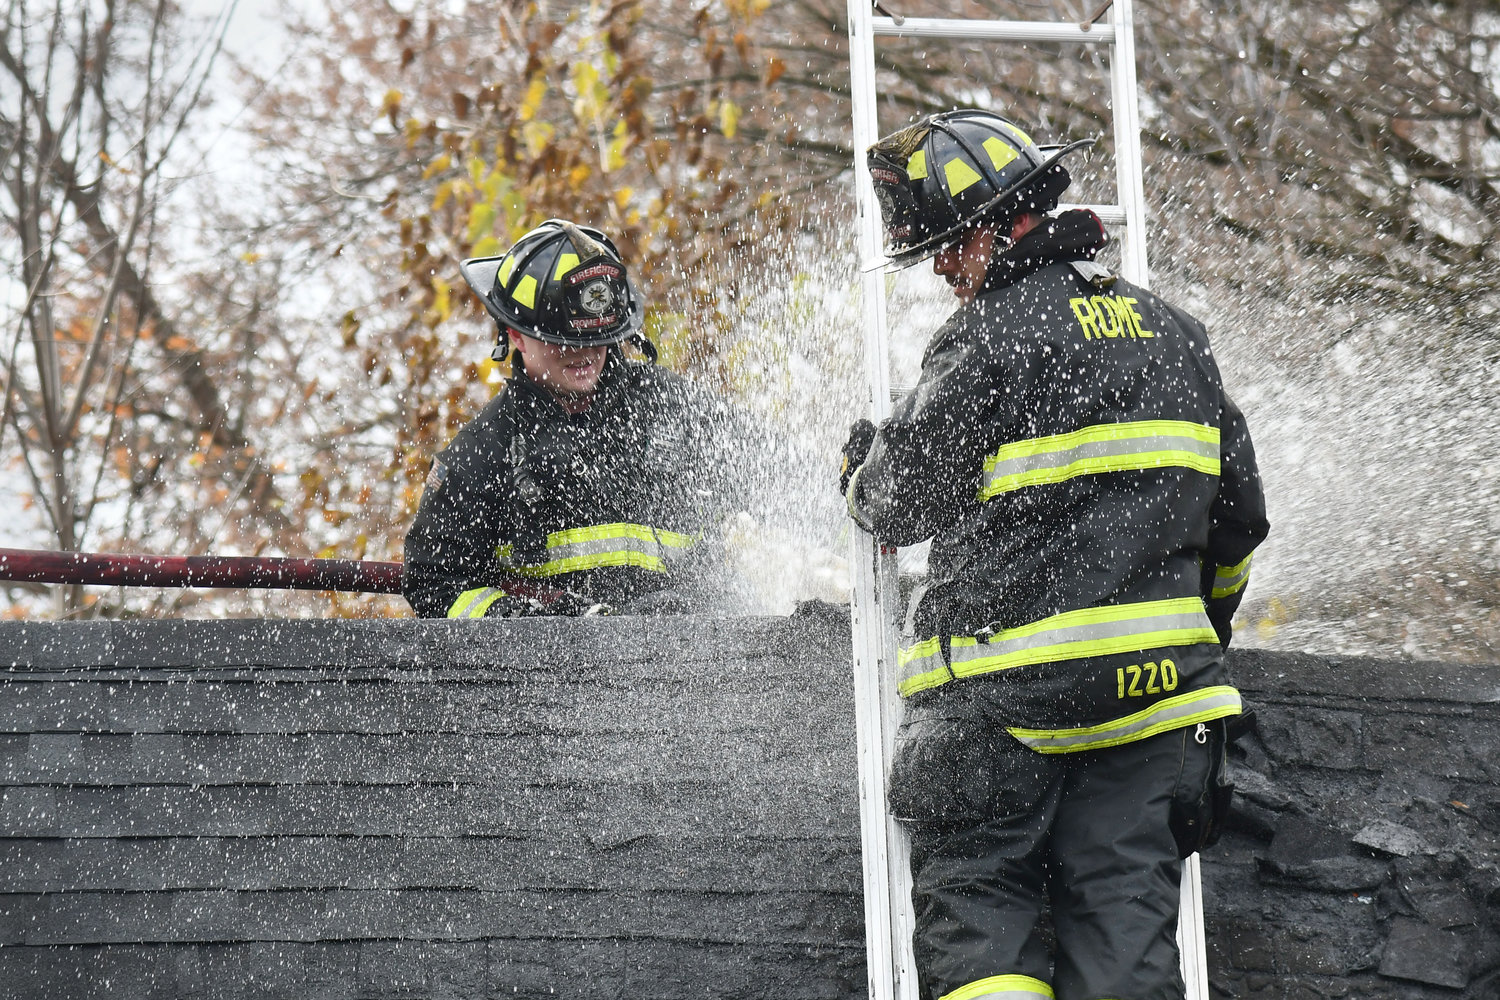 Rome firefighters spray the smoldering roof of a garage that caught fire Monday at 310 S. George St. Fire Chief Thomas Iacovissi said smoke and flames were visible upon arrival, but the fire was knocked down quickly. The cause remains under investigation. No injuries were reported.